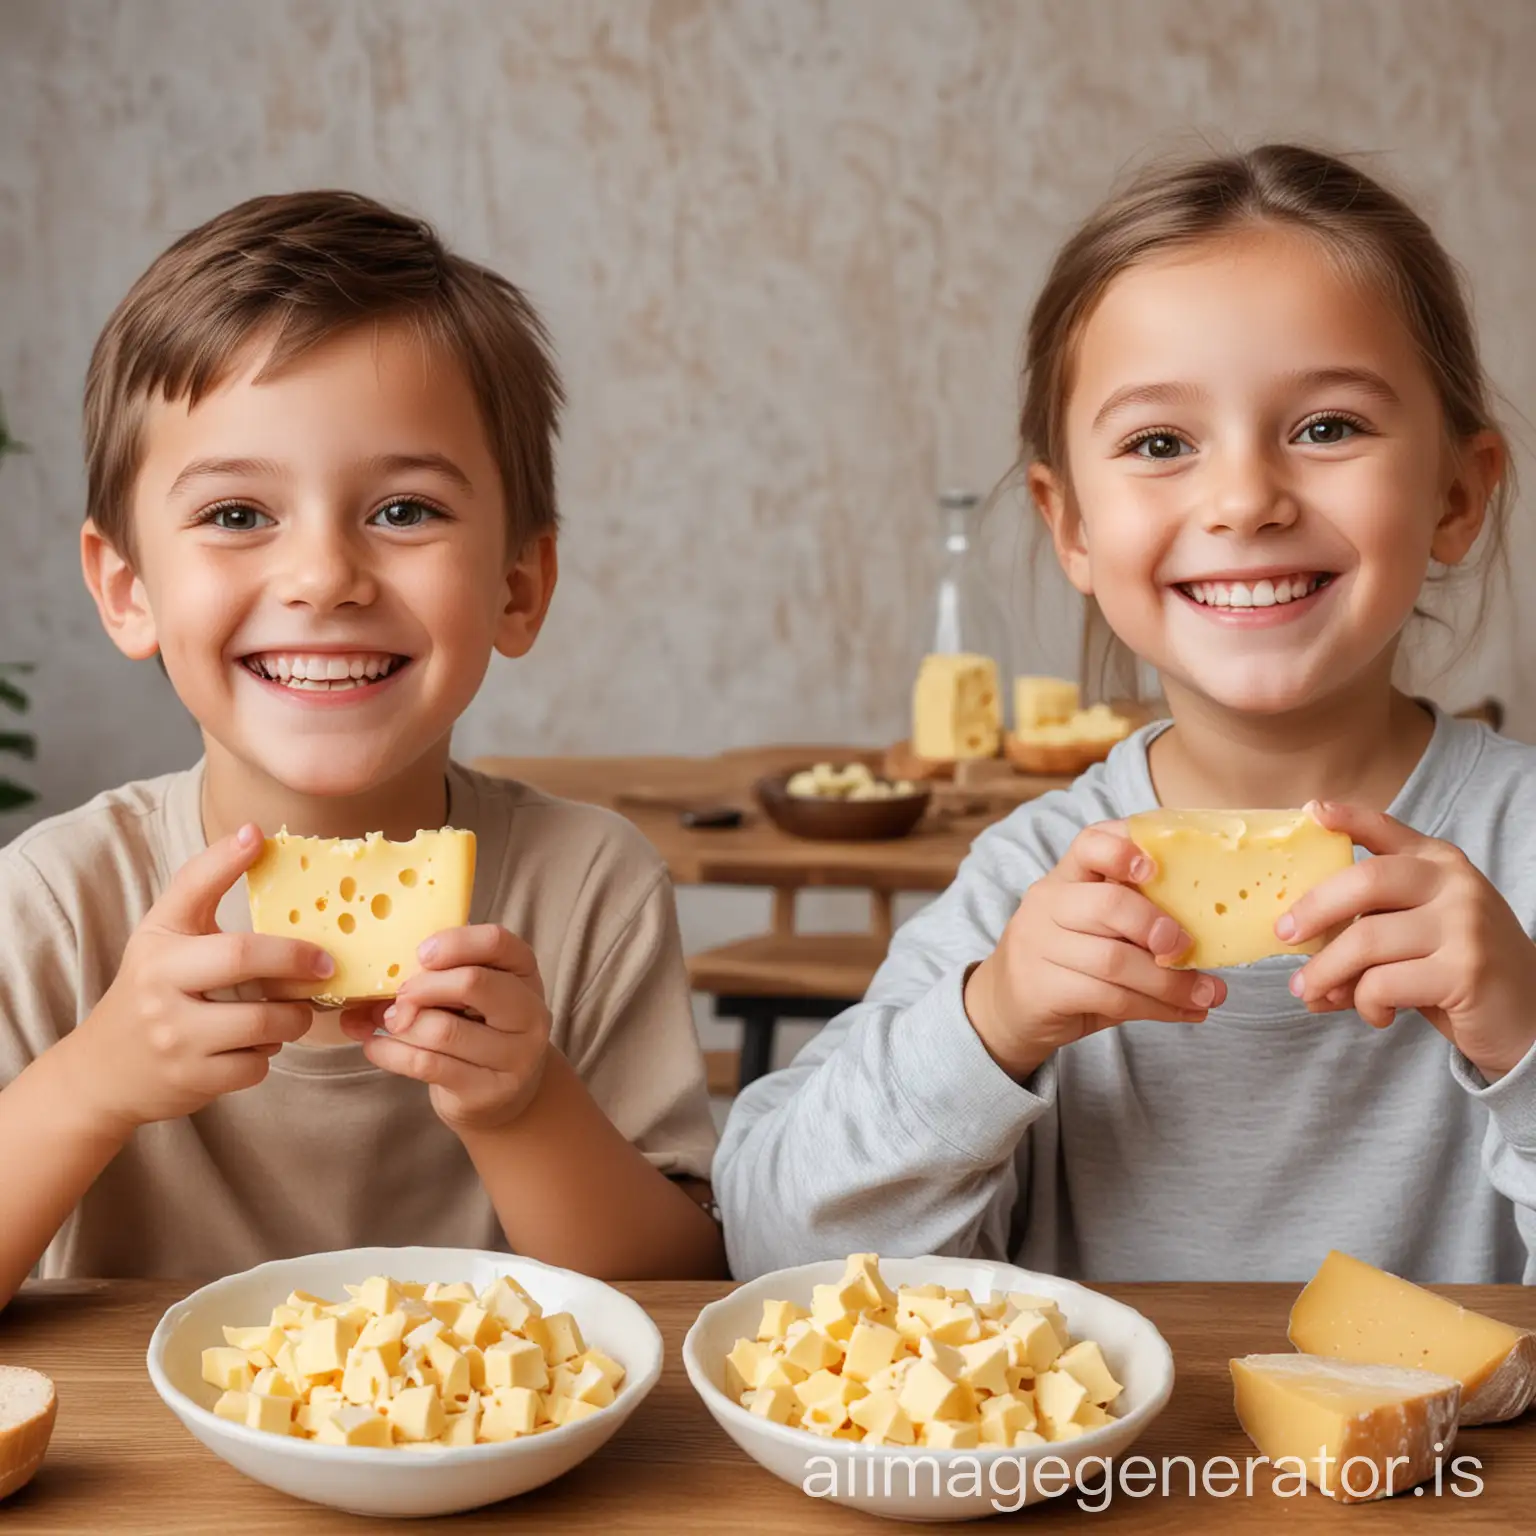 A happy boy and a girl are looking at us, holding a little cheese in their hands in front of a table full of cheese in bowls and on the table.